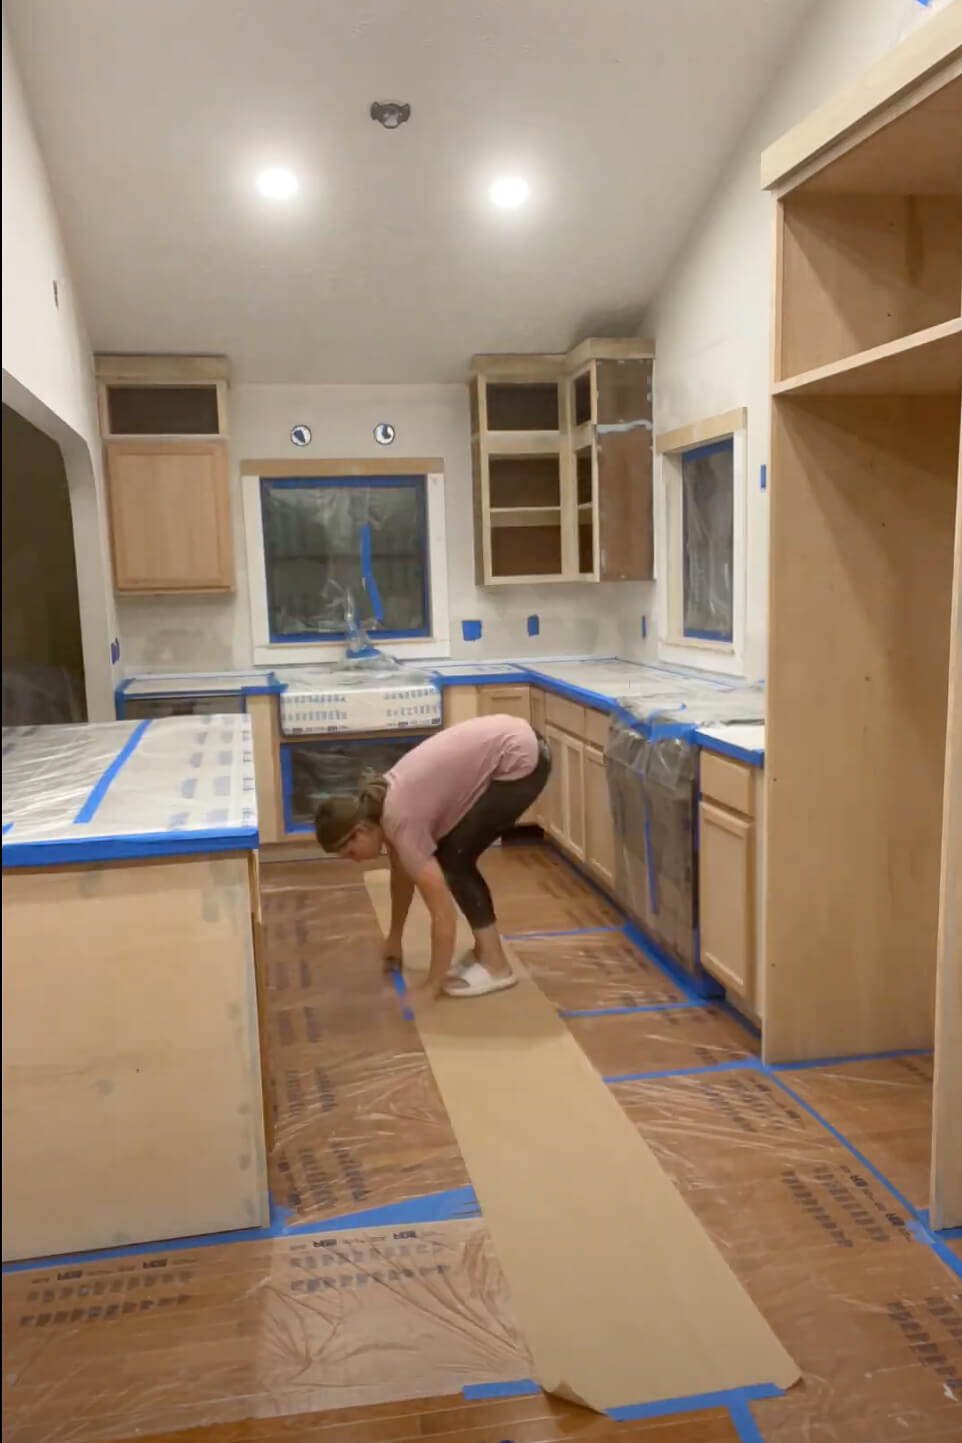 Woman prepping kitchen to paint DIY Refrigerator Cabinet.